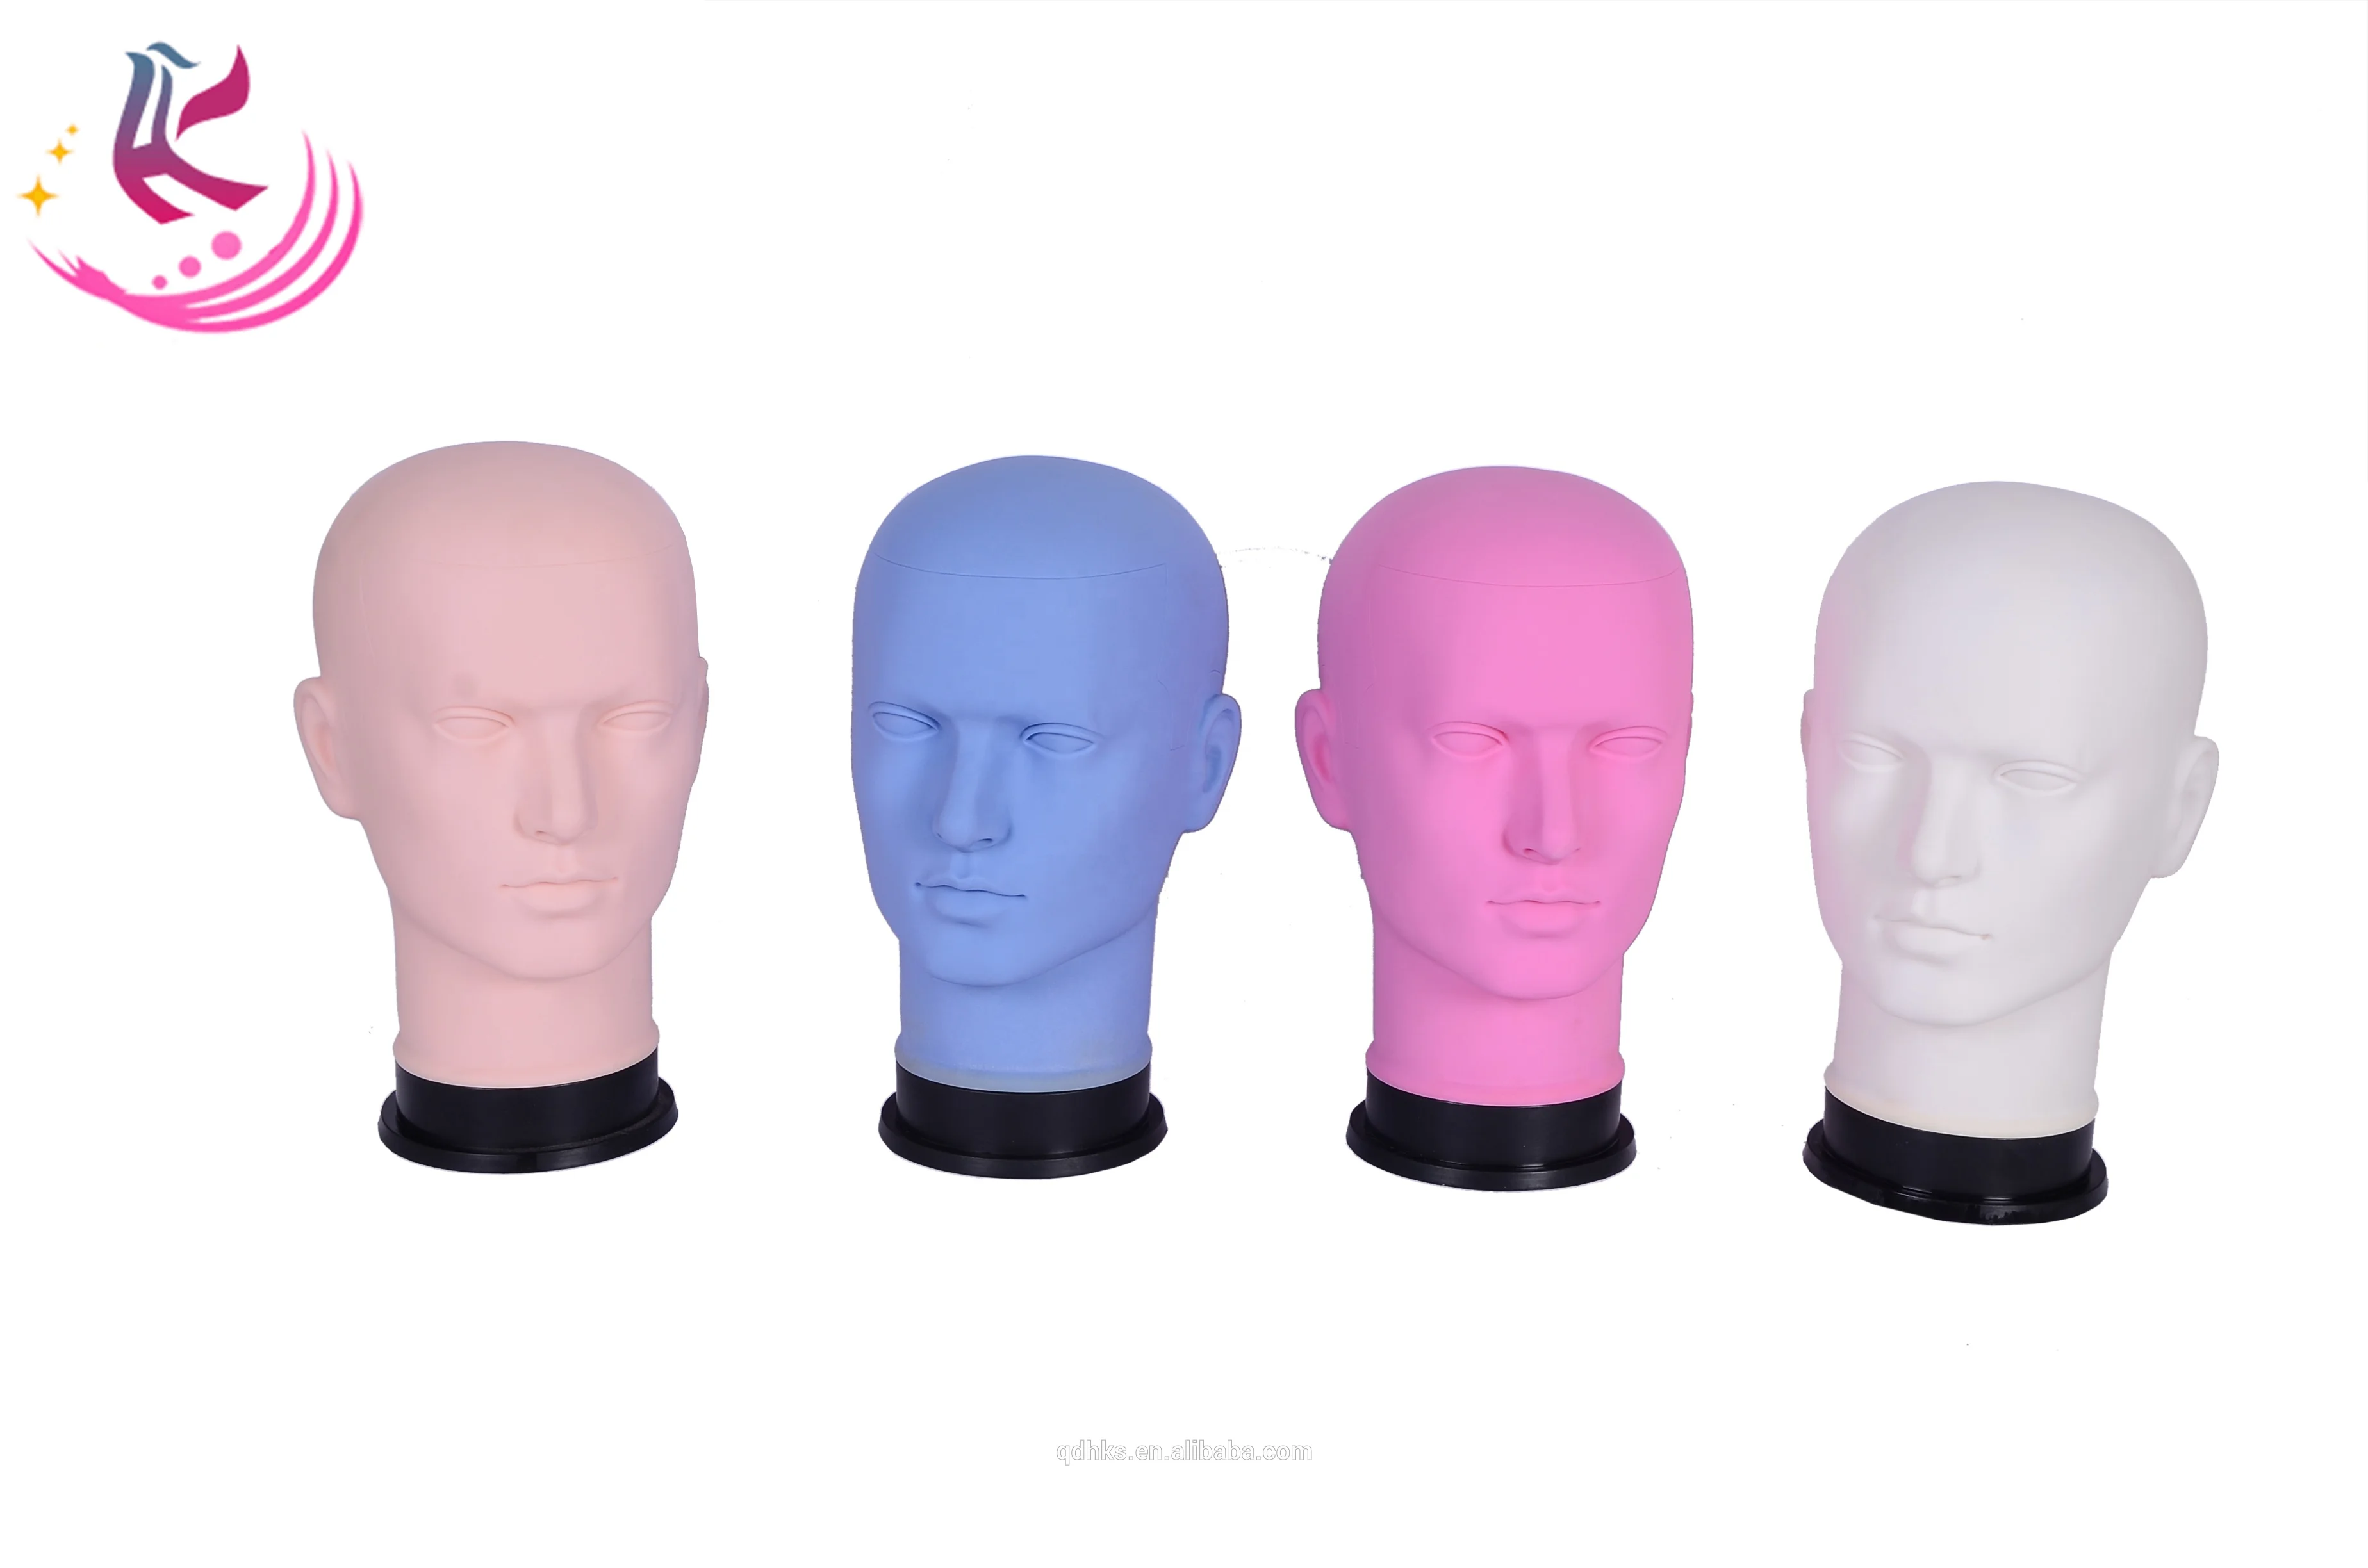 
clear head mannequin mannequin head and neck toy mannequin head 